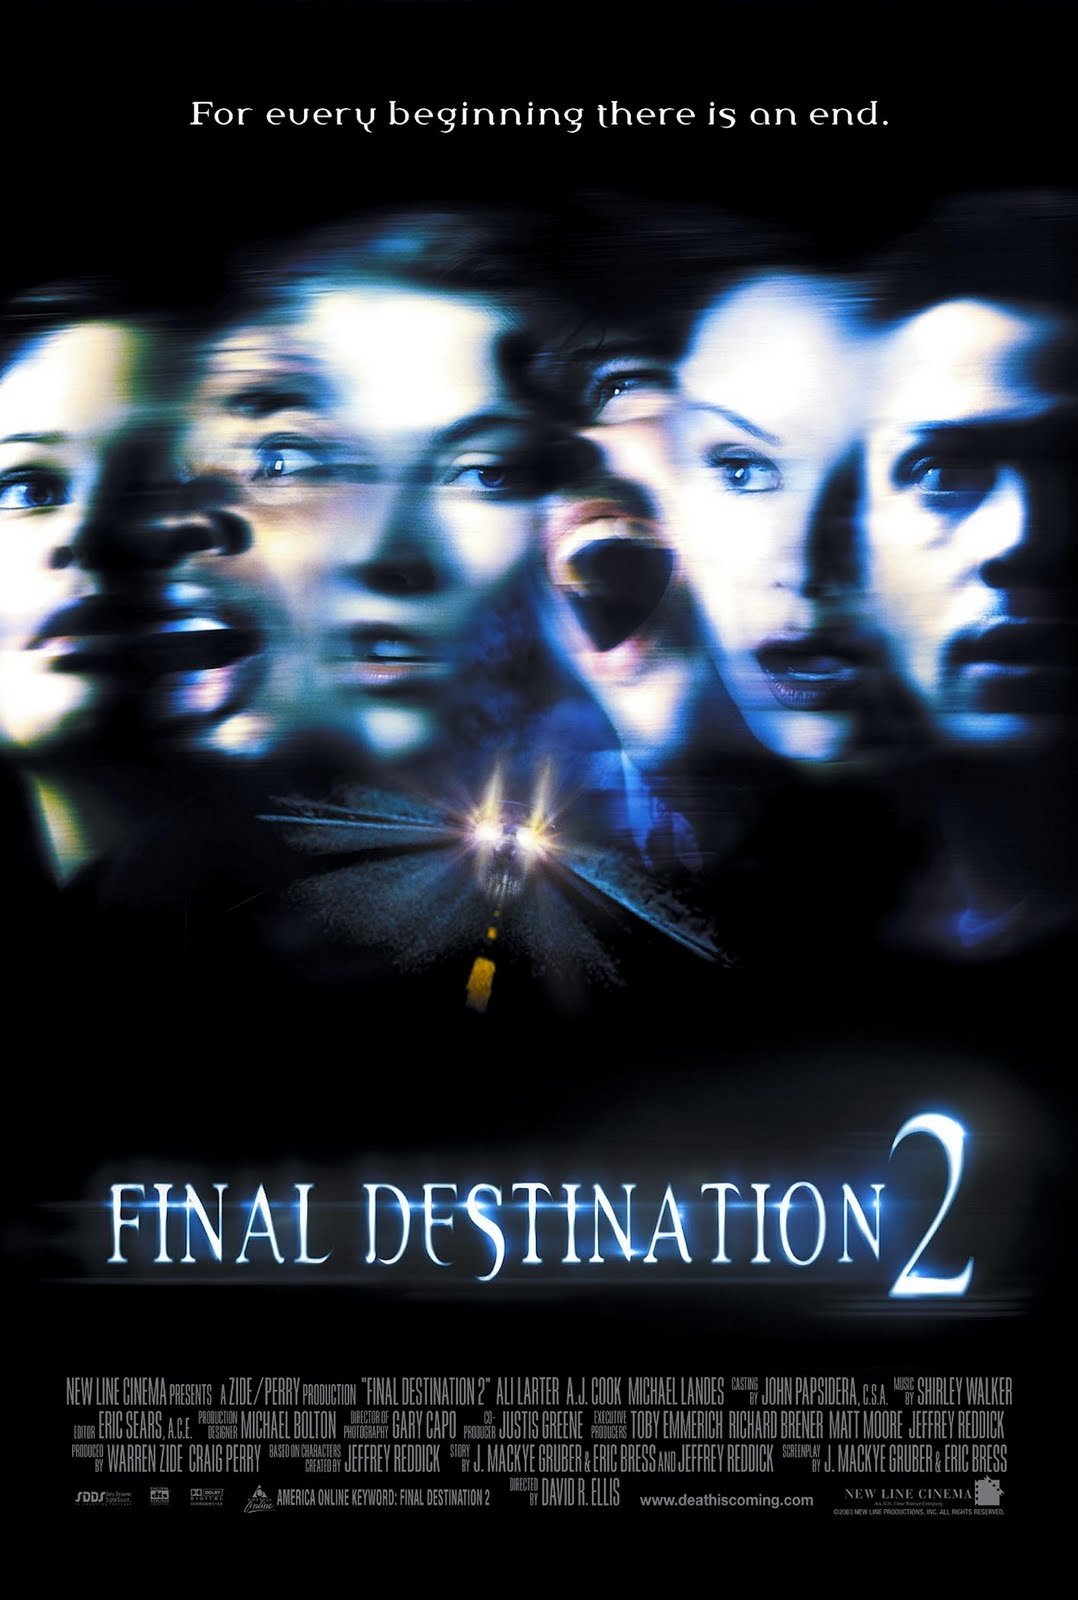 Poster of the movie Final Destination 2